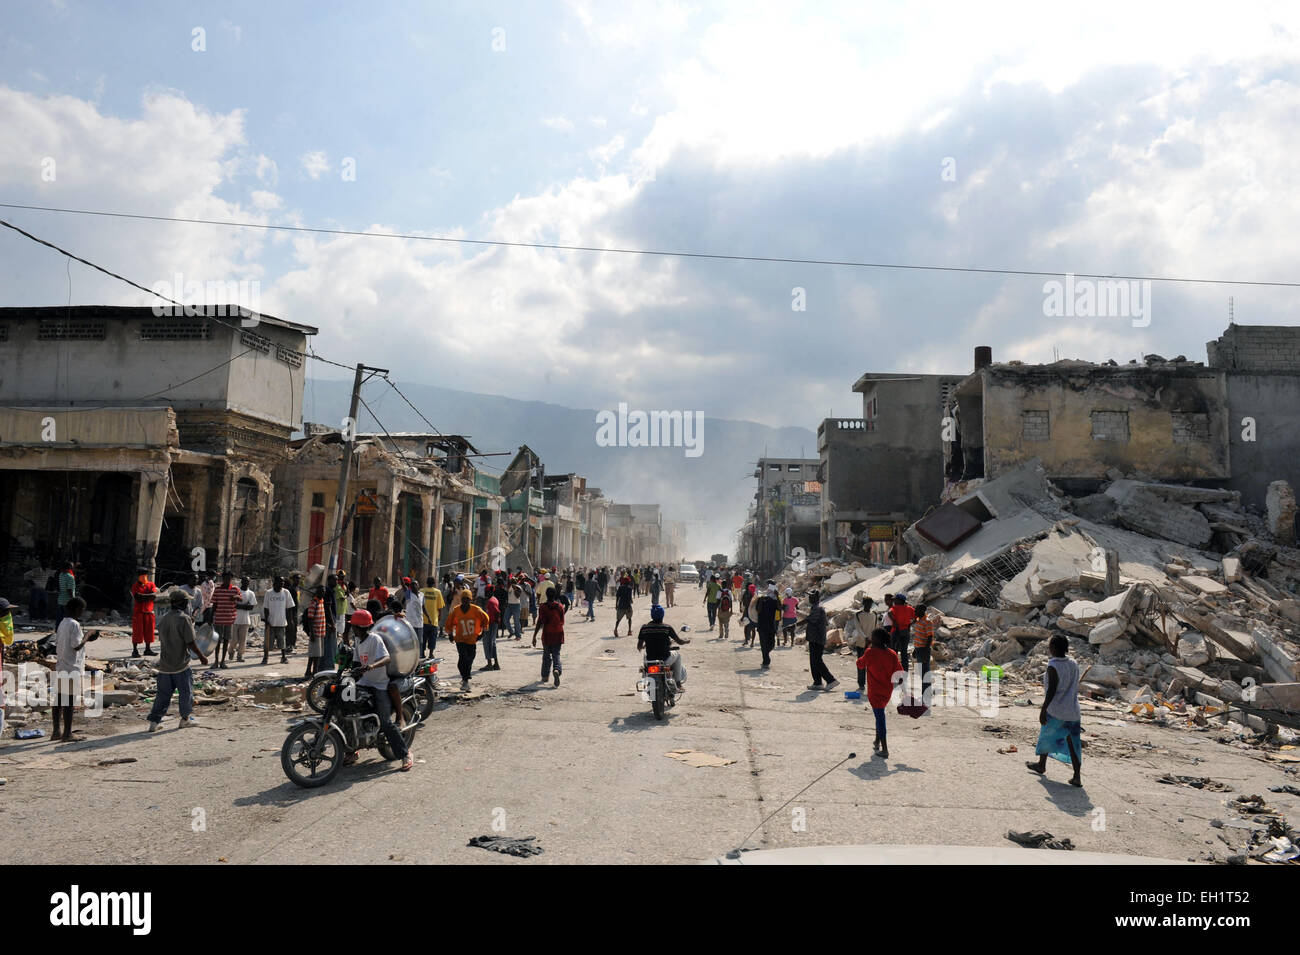 Large parts of the capital city were totally destroyed from the earthquake in Port Au Prince, Haiti, 17 January, 2010. Stock Photo